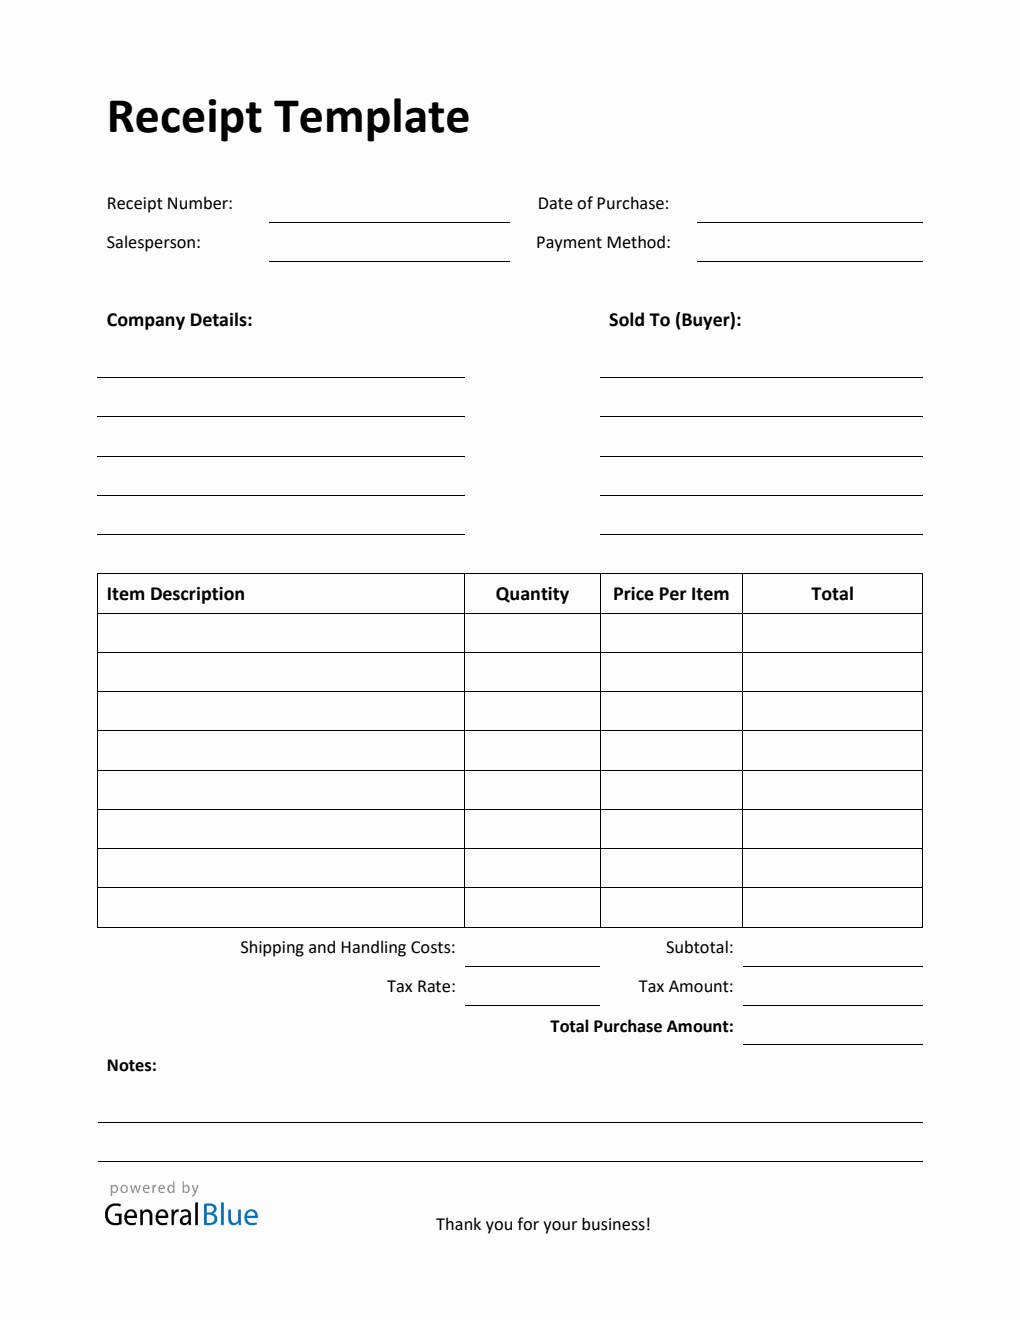 Printable Receipt Template with Notes in Word